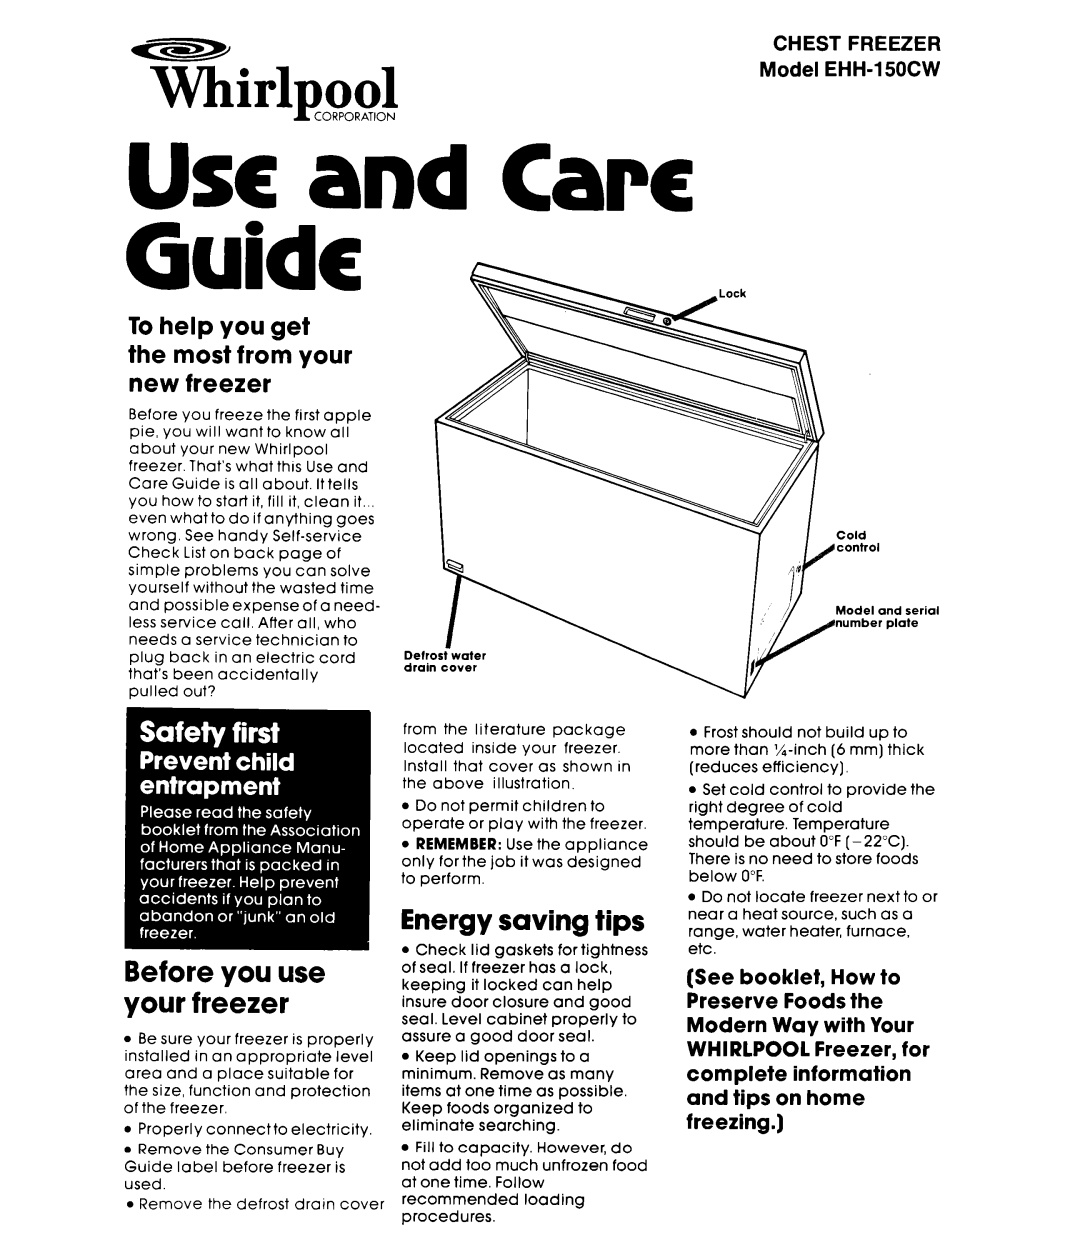 Whirlpool manual Before you use your freezer, Energy saving tips, CHEST FREEZER Model EHH-150CW, USC and Care Guide 